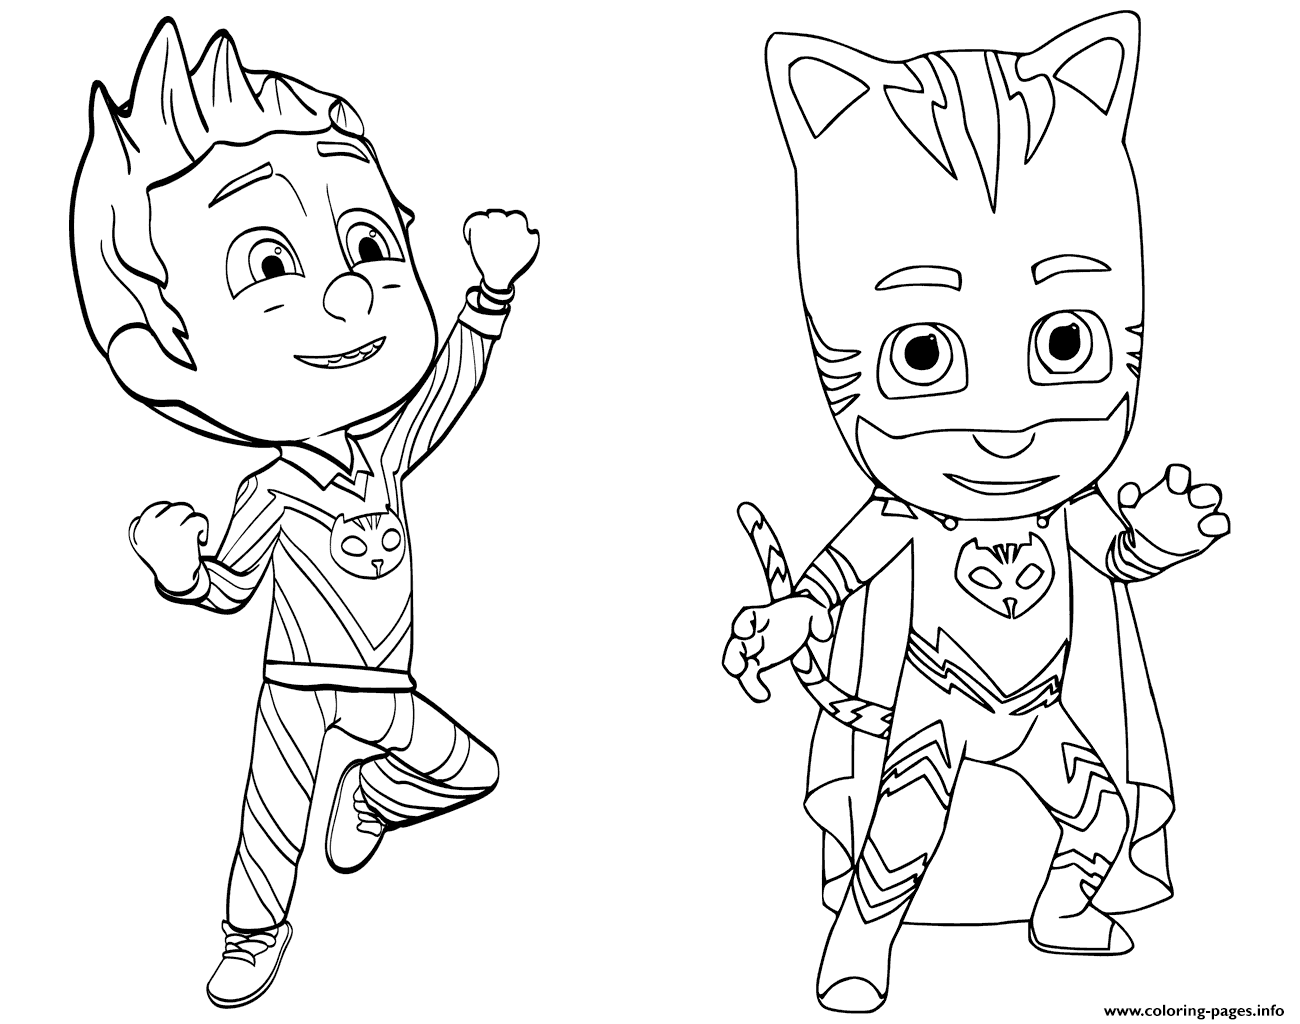 Pajama Hero Connor Catboy Pj Masks Coloring Pages Printable